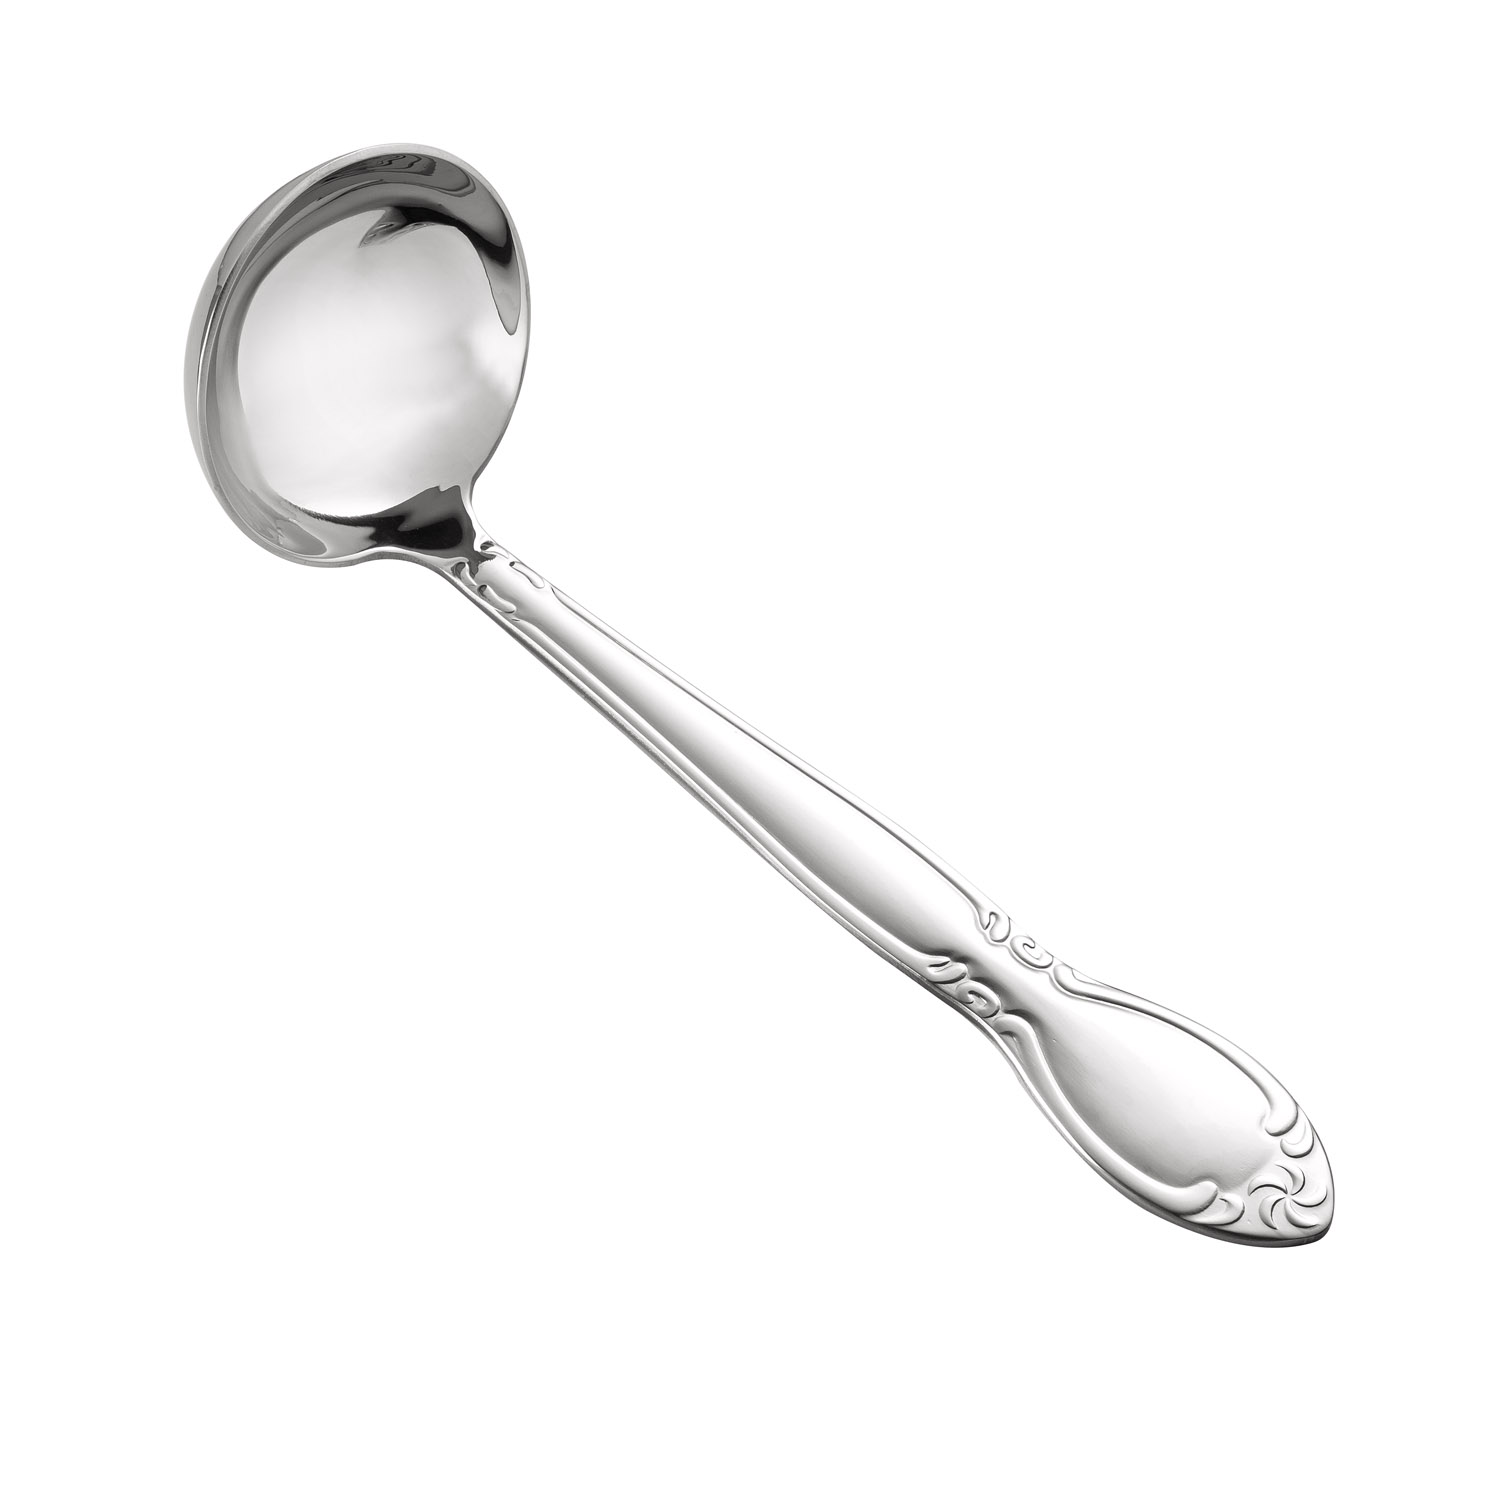 CAC China 3023-37 Louvre Ladle, Extra Heavy Weight 18/0, 2 oz., 9-1/4" 